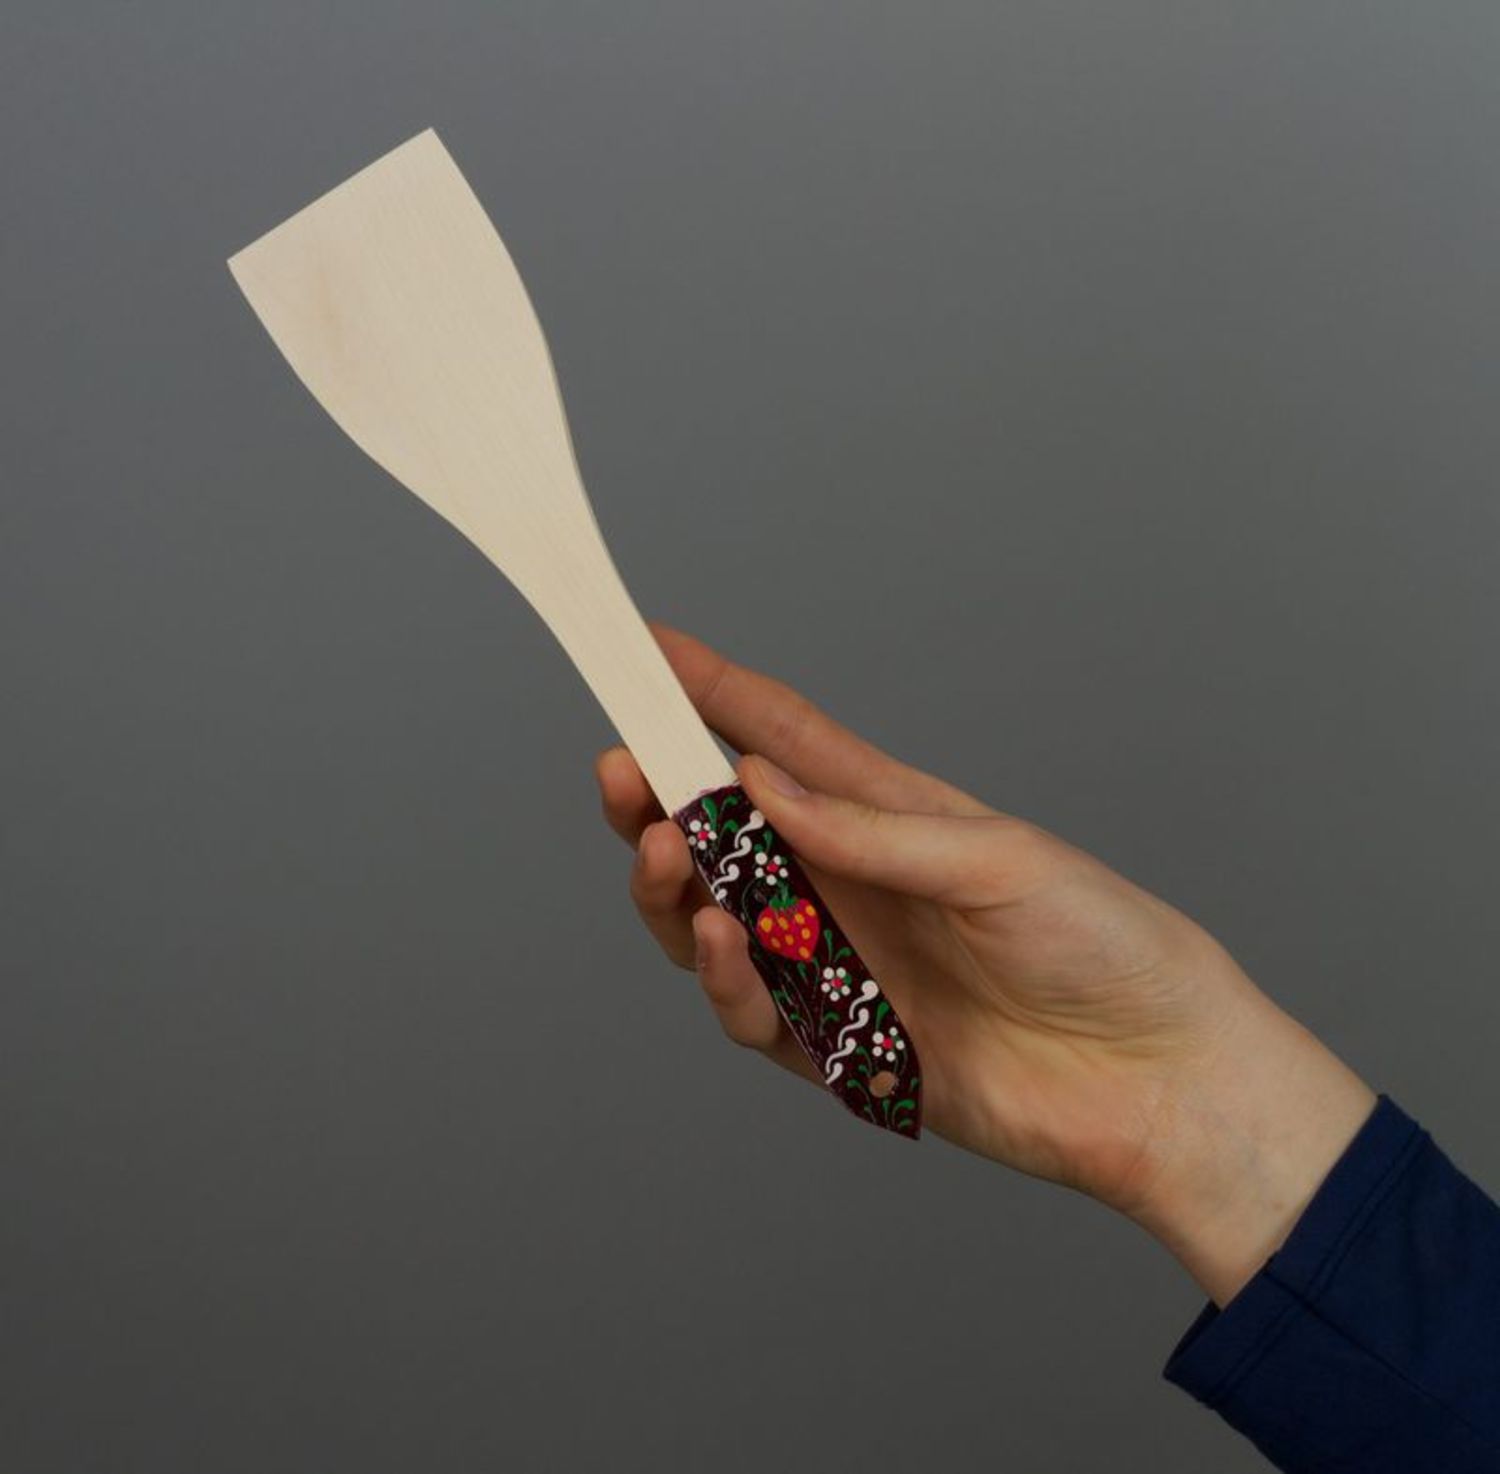 Wooden spatula with painting photo 2